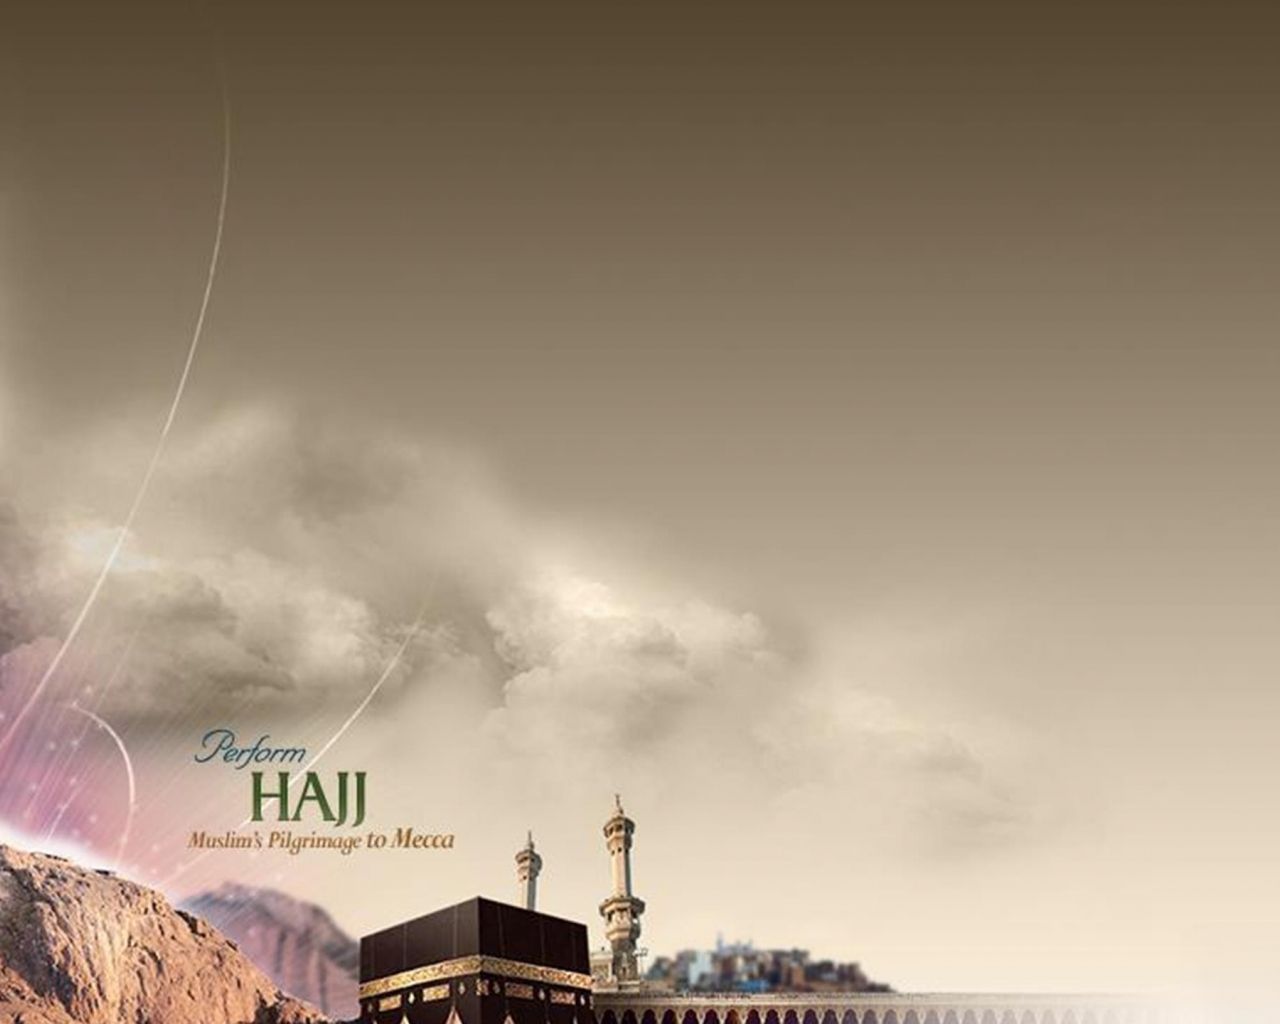 Free download Hajj Wallpaper HD Picture Live HD Wallpaper HQ [2560x1440] for your Desktop, Mobile & Tablet. Explore Background Image HDd Wallpaper For Desktop, HD Wallpaper Downloads Free